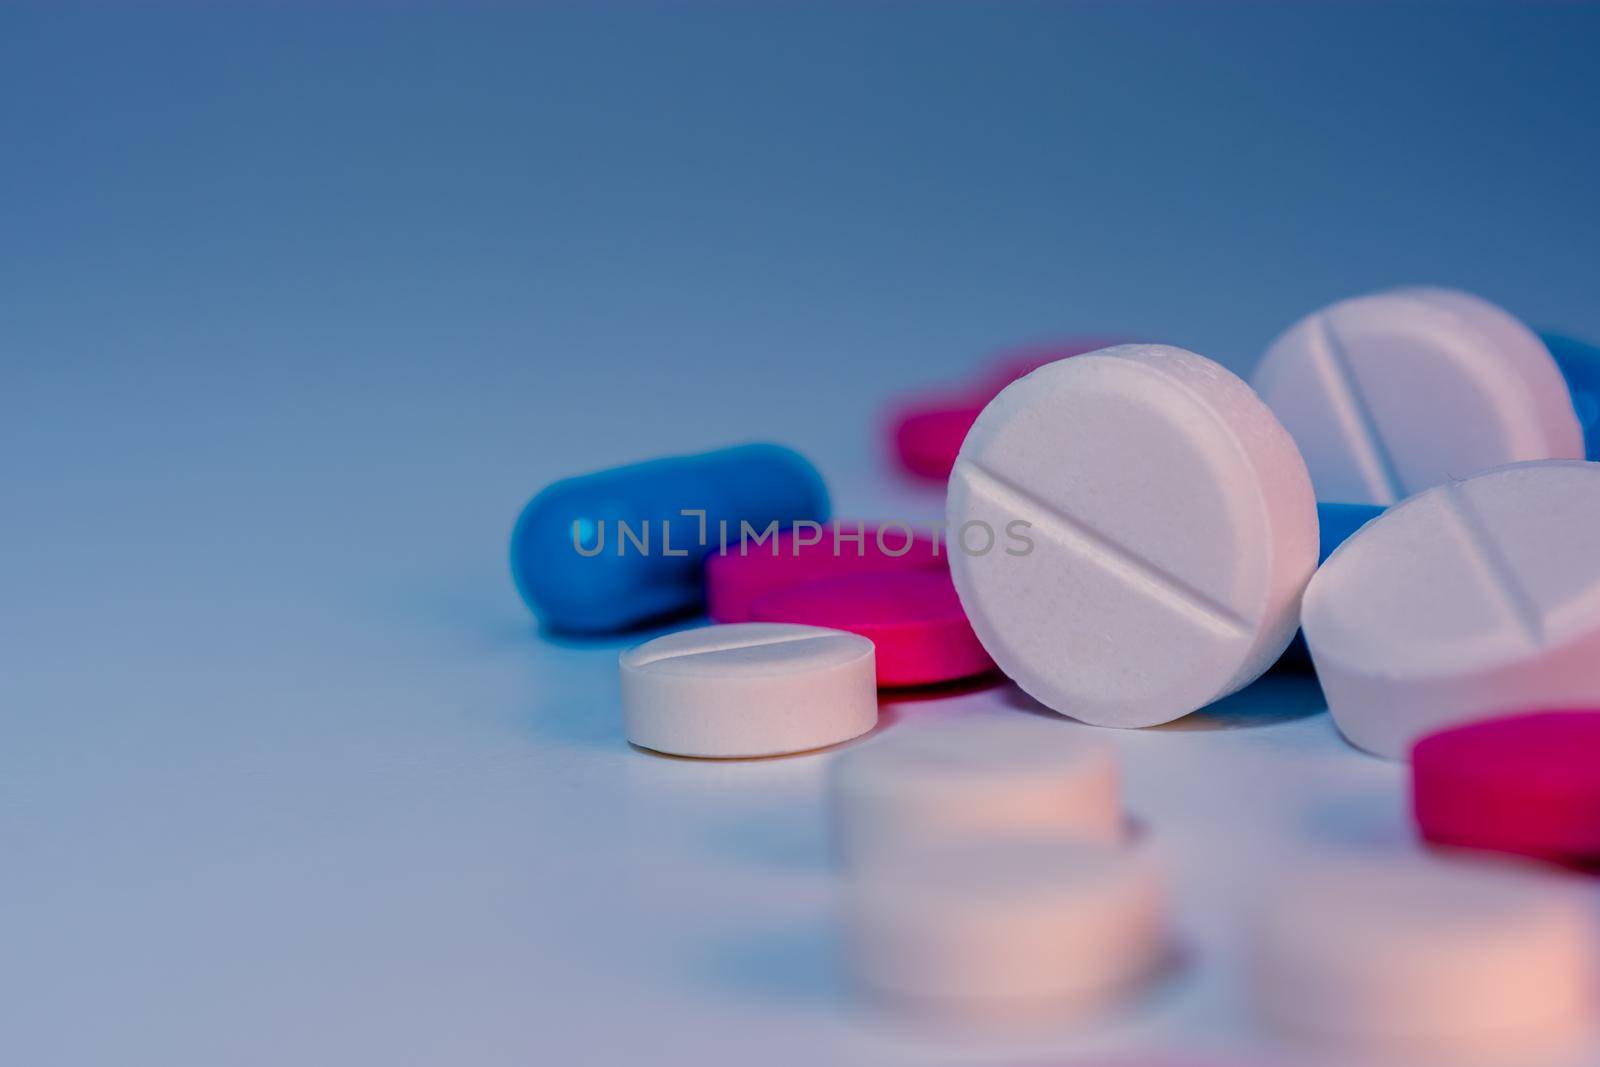 Several scattered pills on the table close-up on a colorful background. Medical theme. Selective focus.